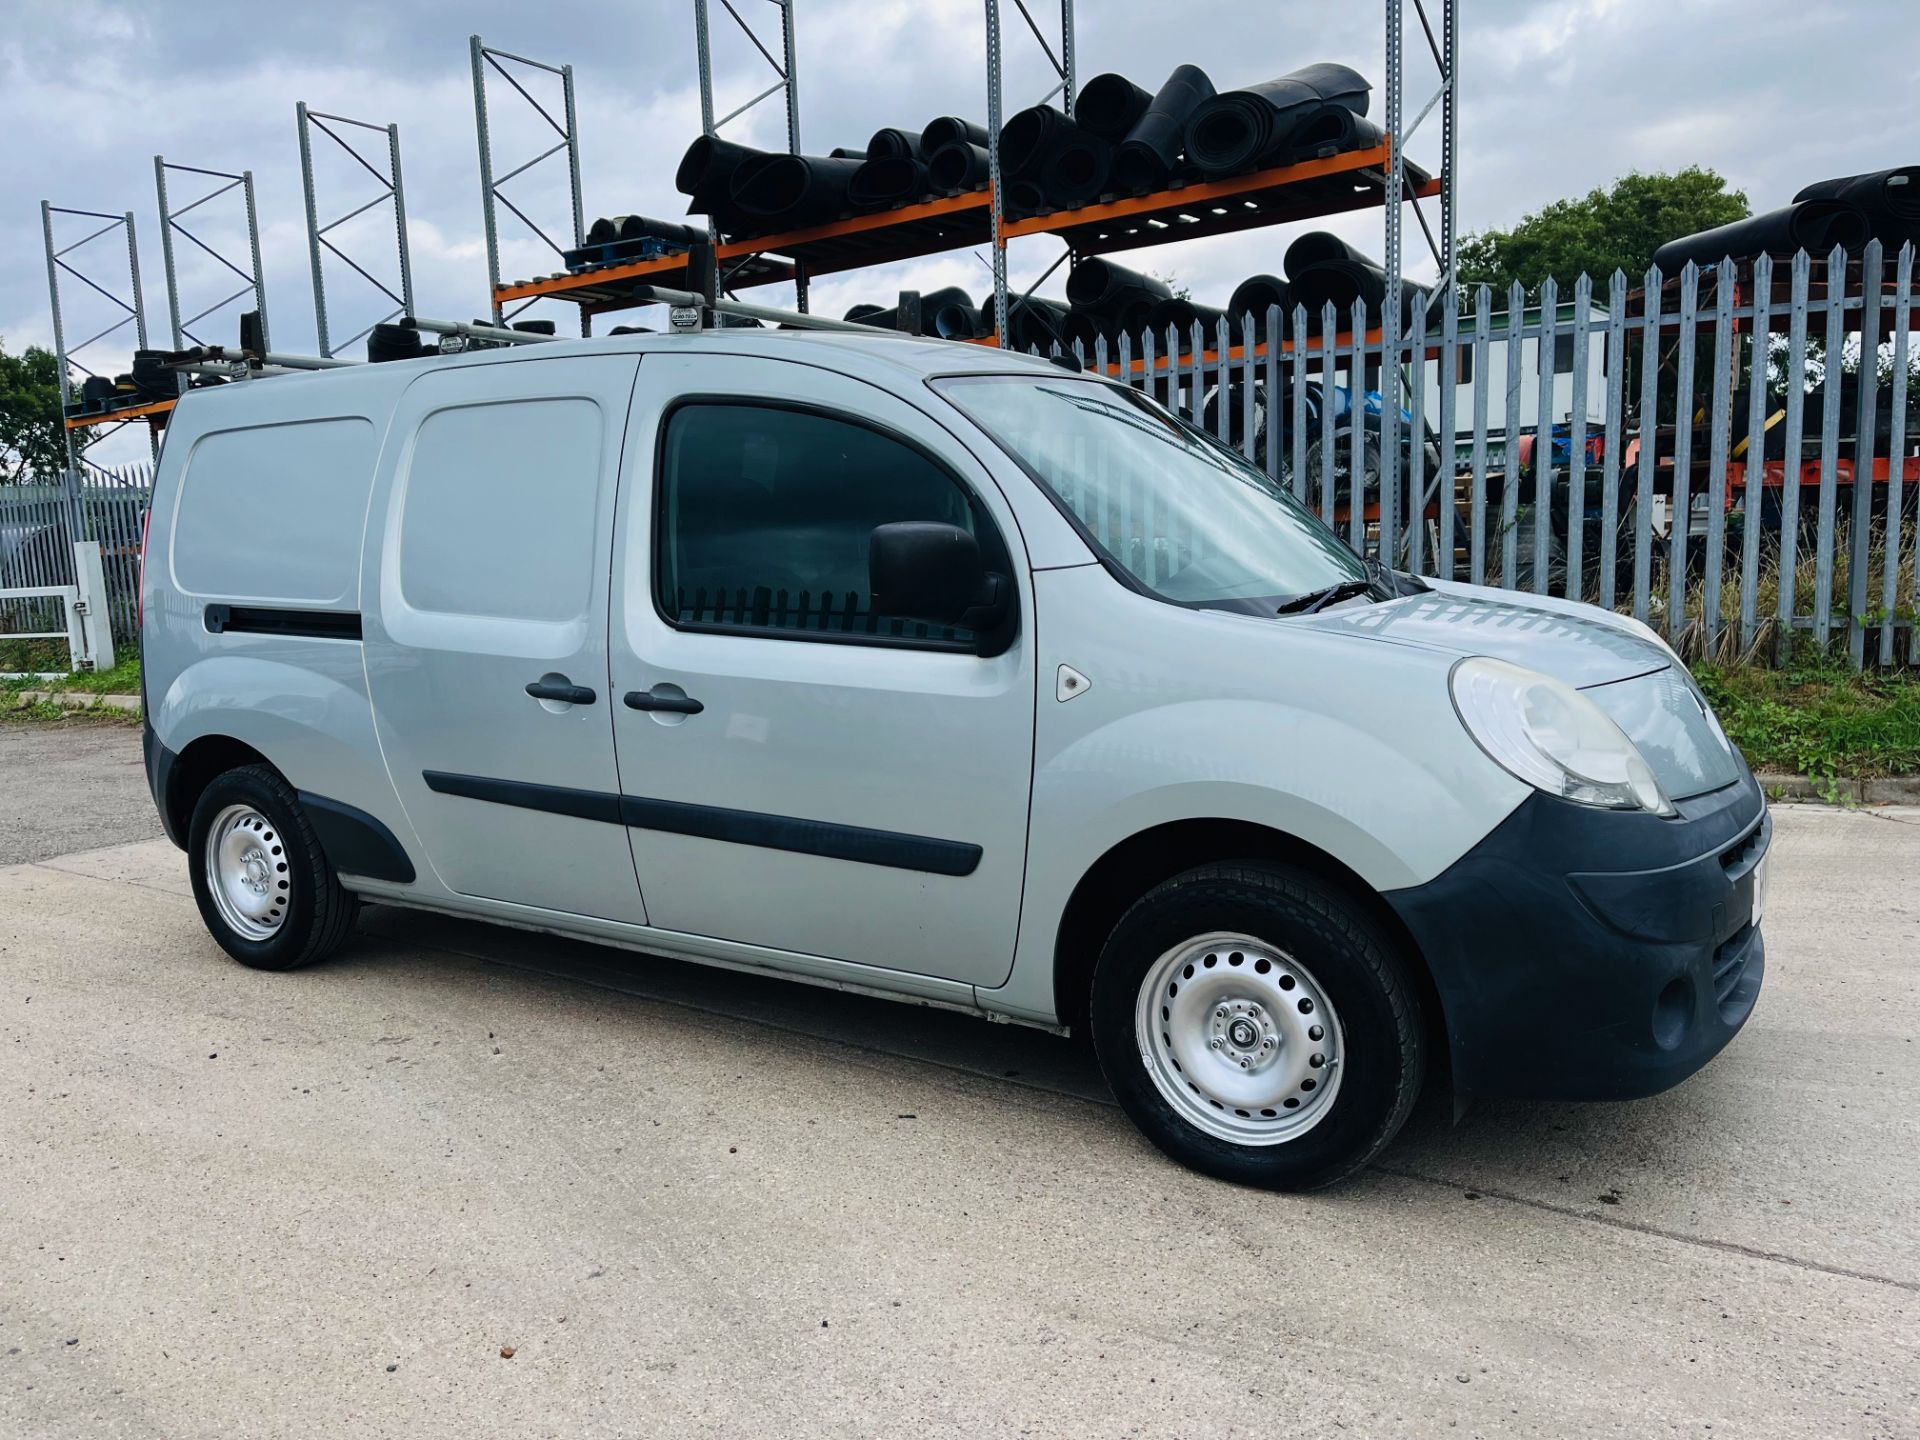 (Reserve Met) Renault Kangoo dci "Maxi Plus" 11reg - Rare and hard to find a Maxi Plus model -No Vat - Image 2 of 18